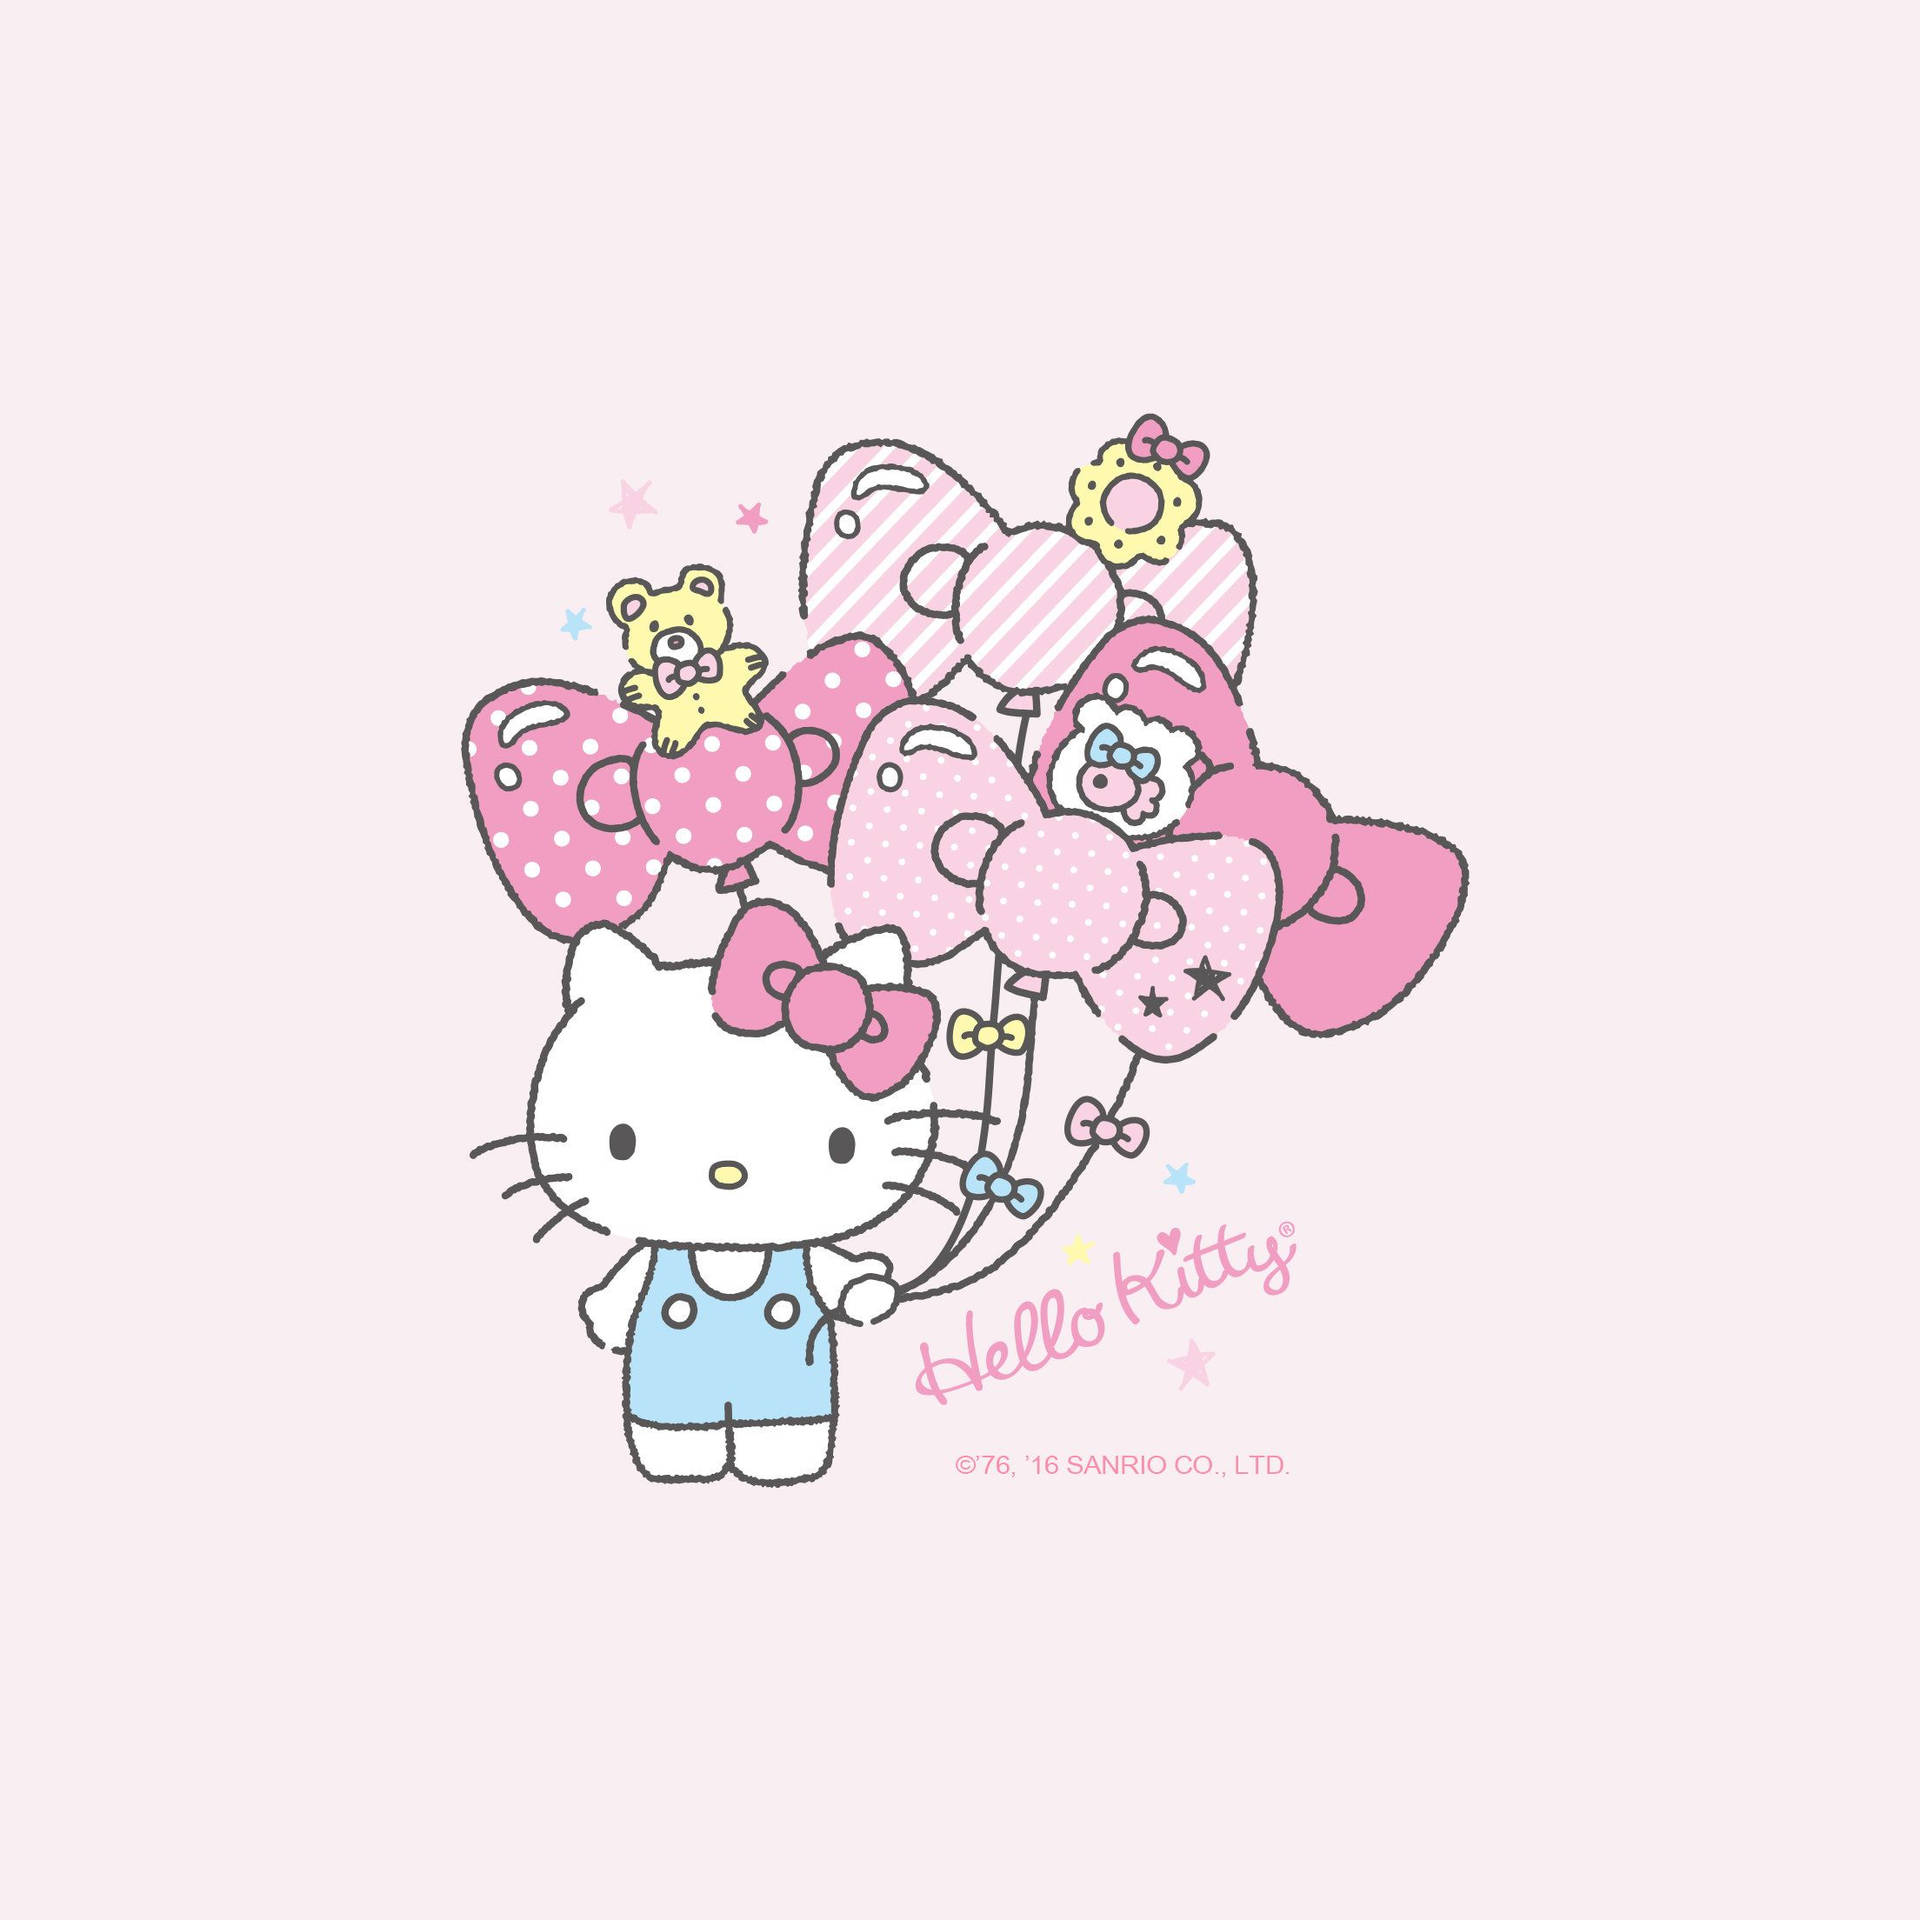 2208X2208 Sanrio Wallpaper and Background